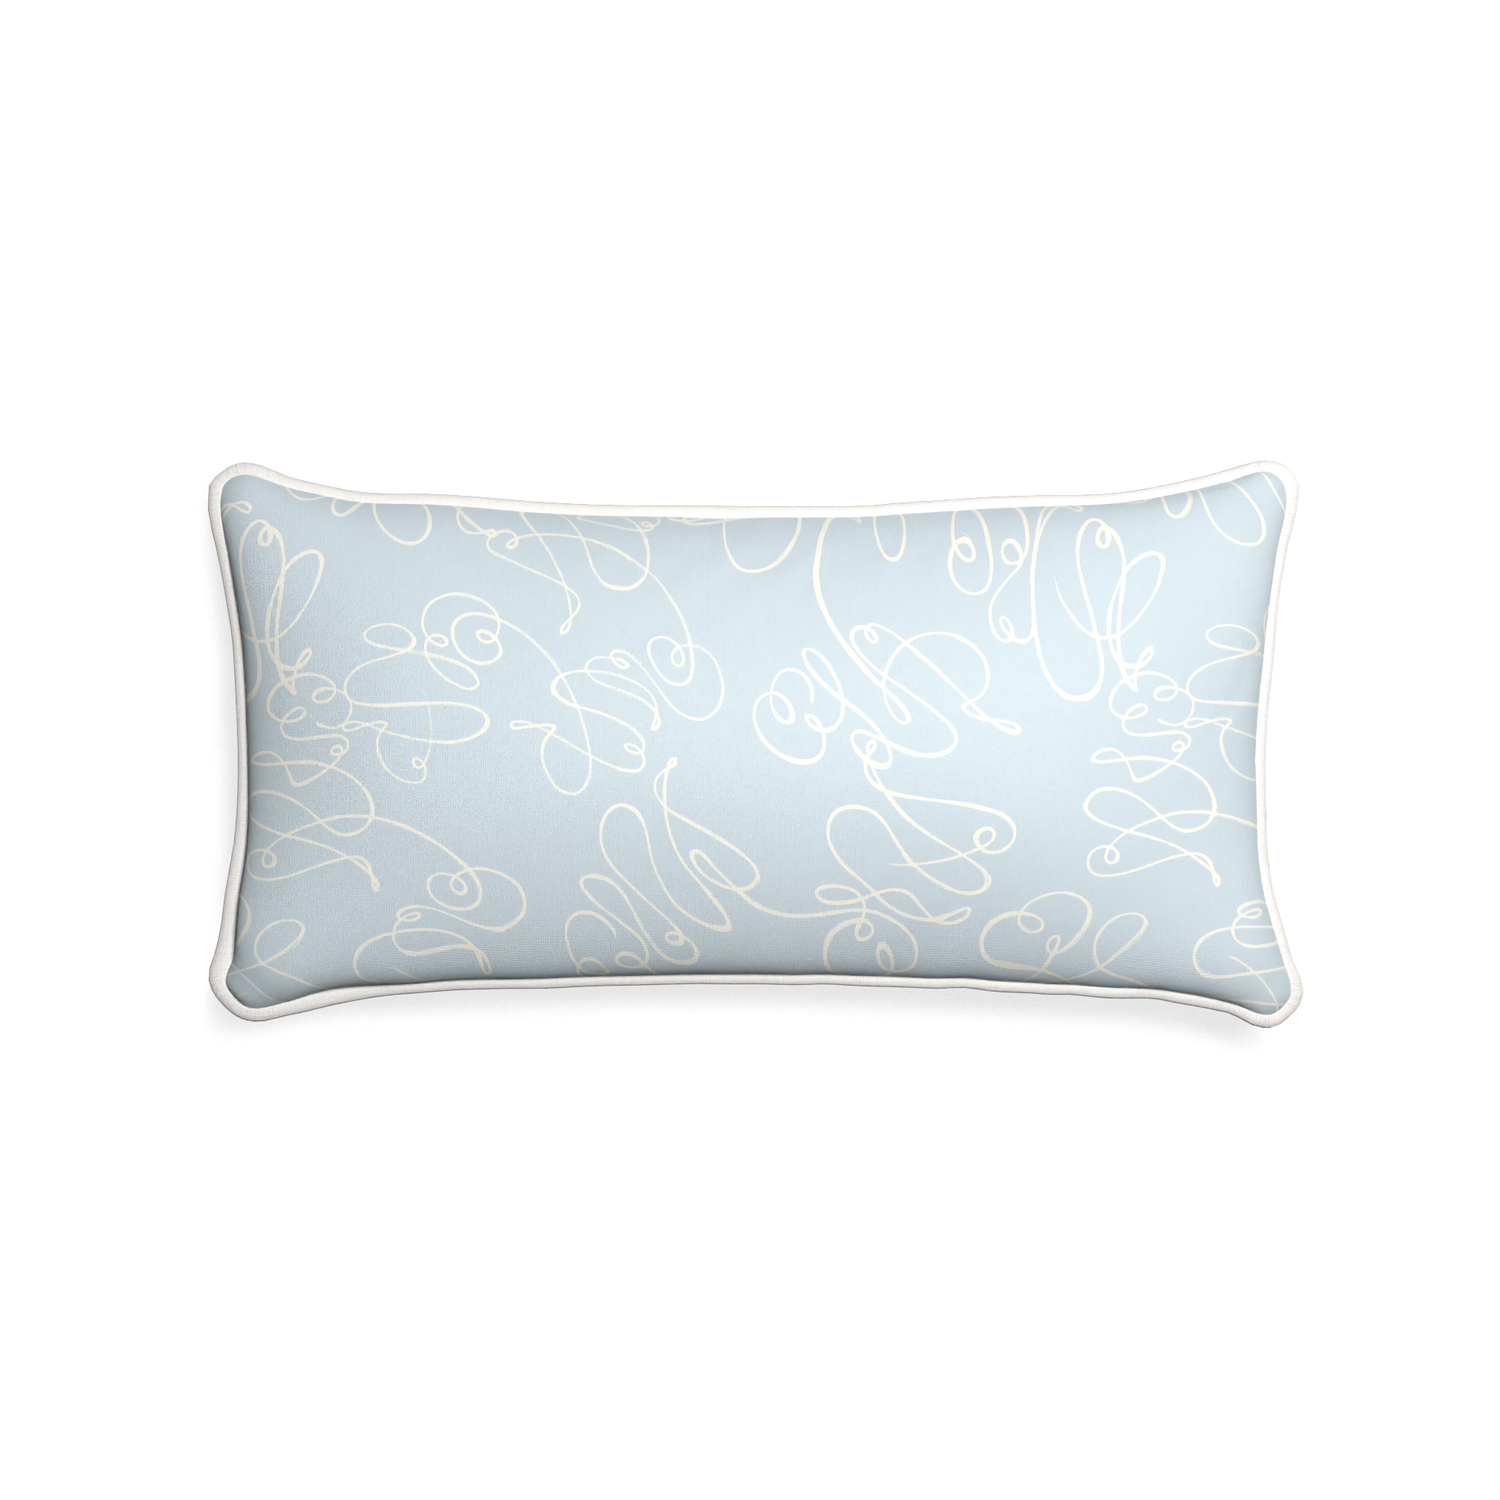 Midi-lumbar mirabella custom powder blue abstractpillow with snow piping on white background